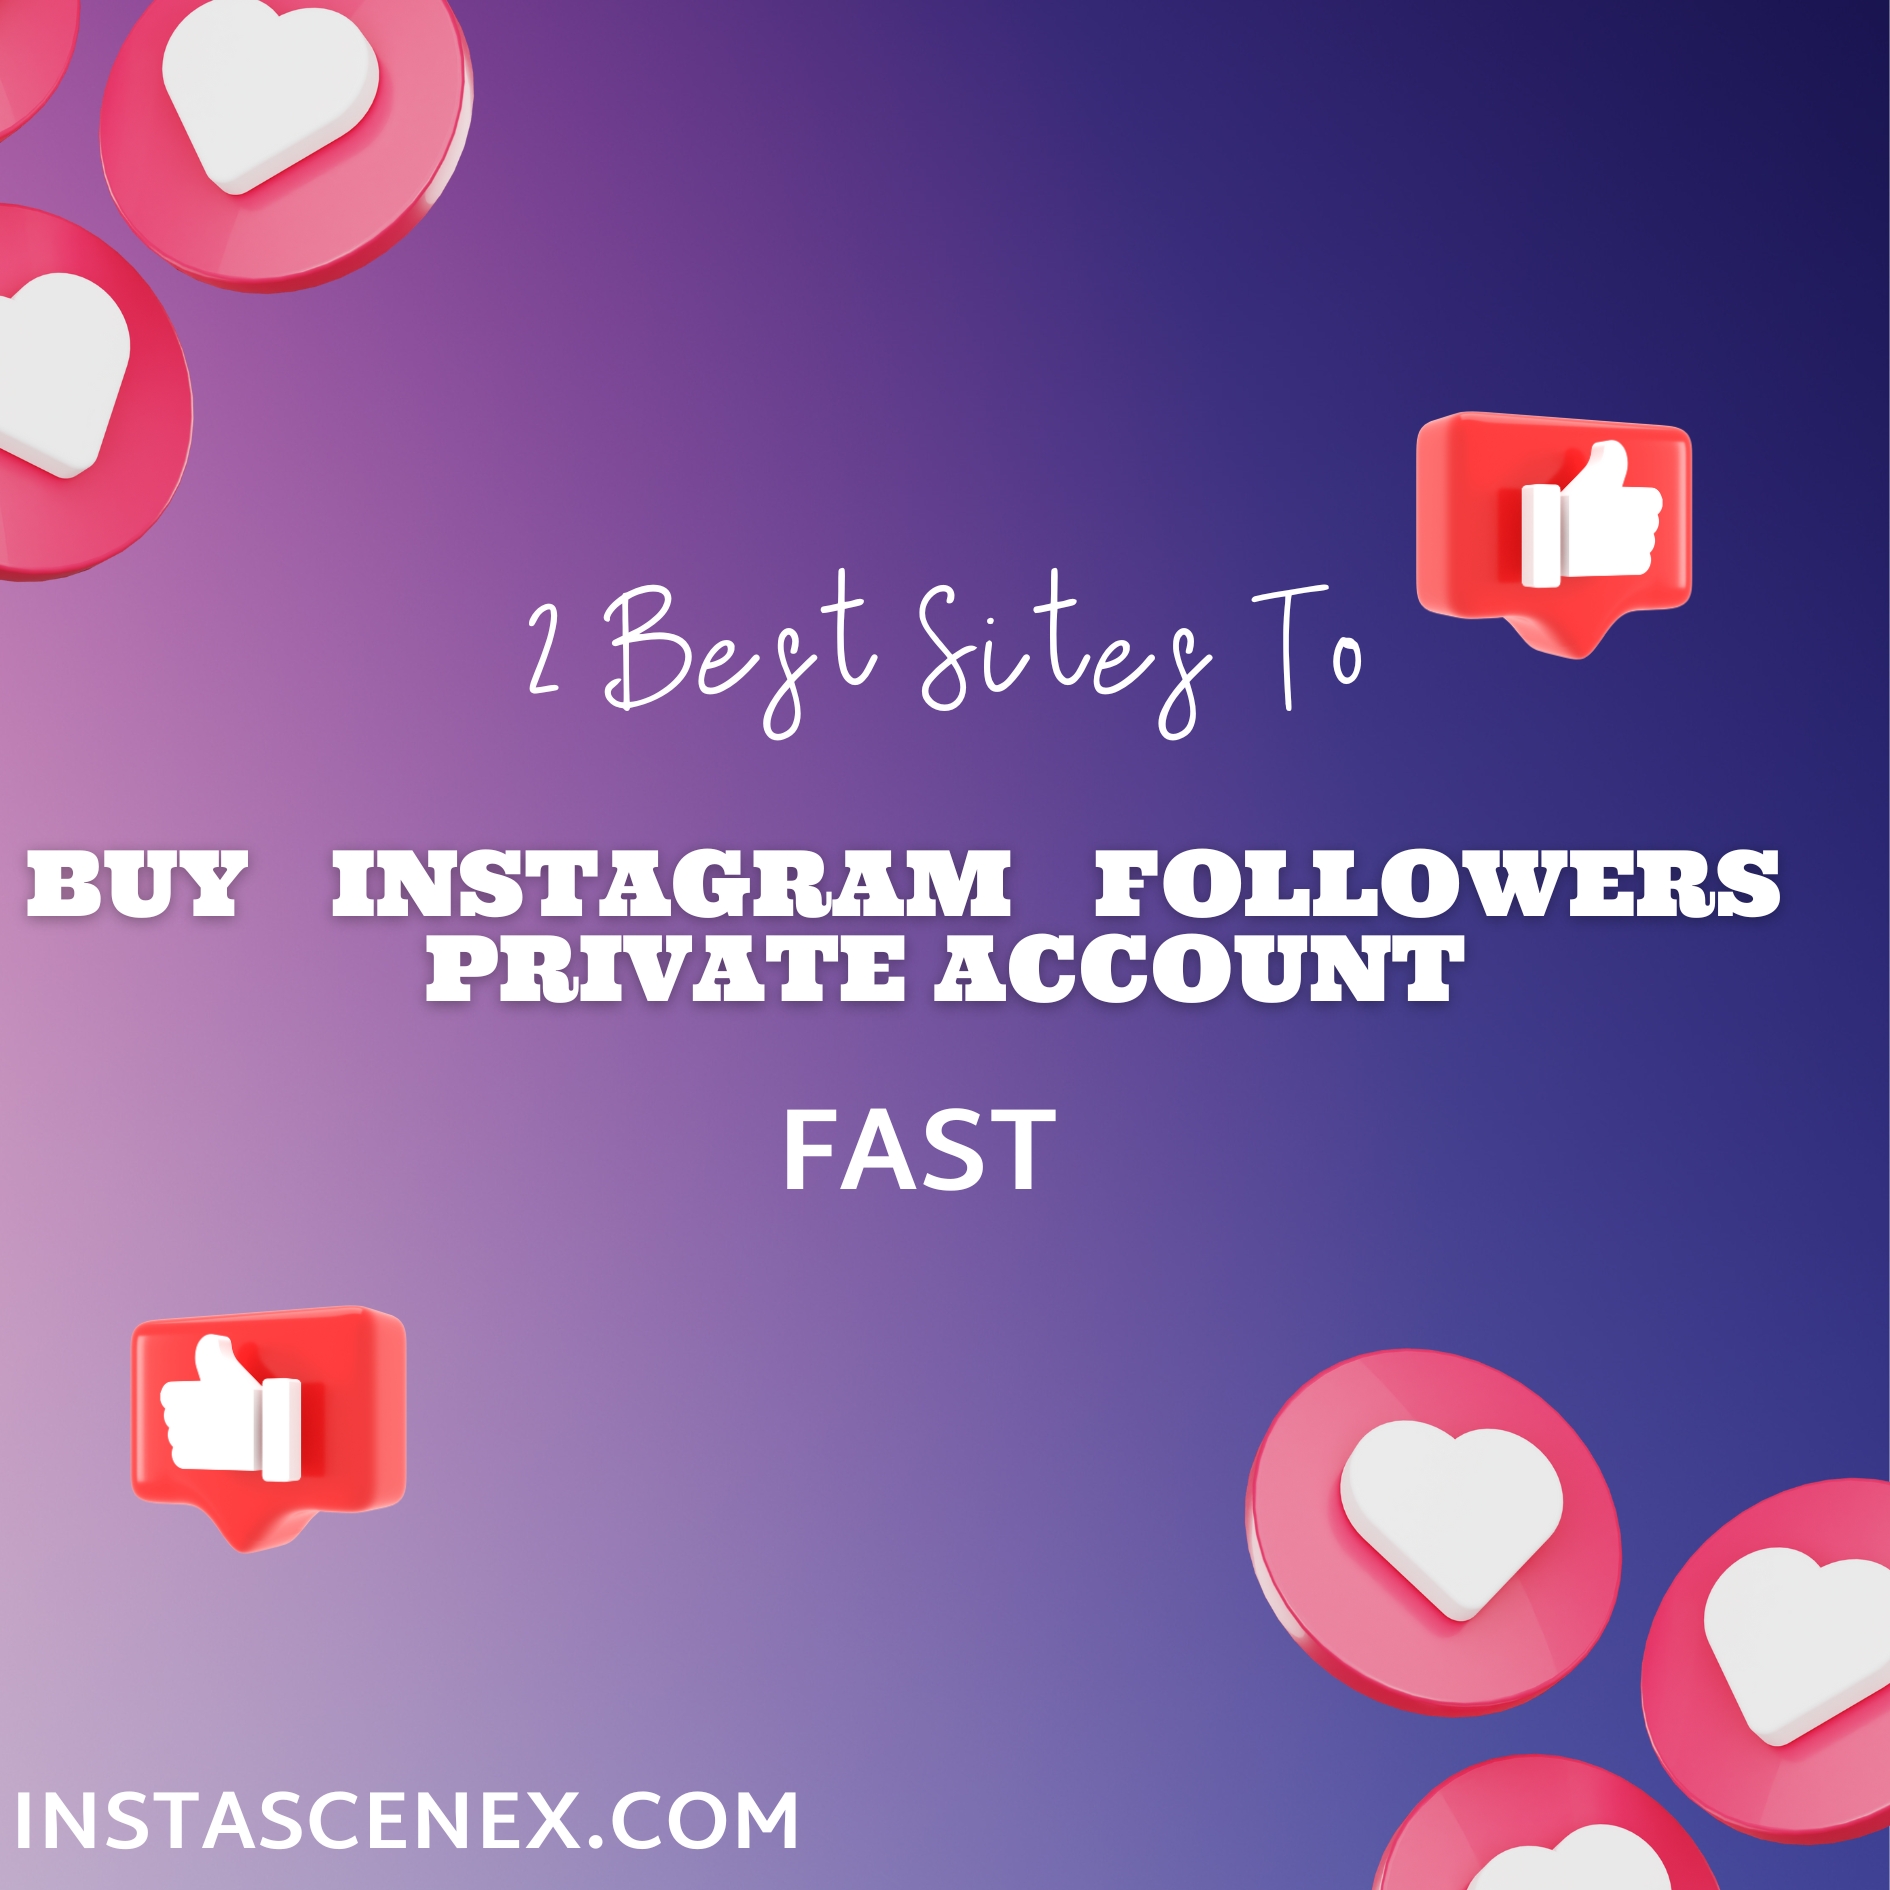 2 Best Sites To Buy Instagram Followers Private Account Fast